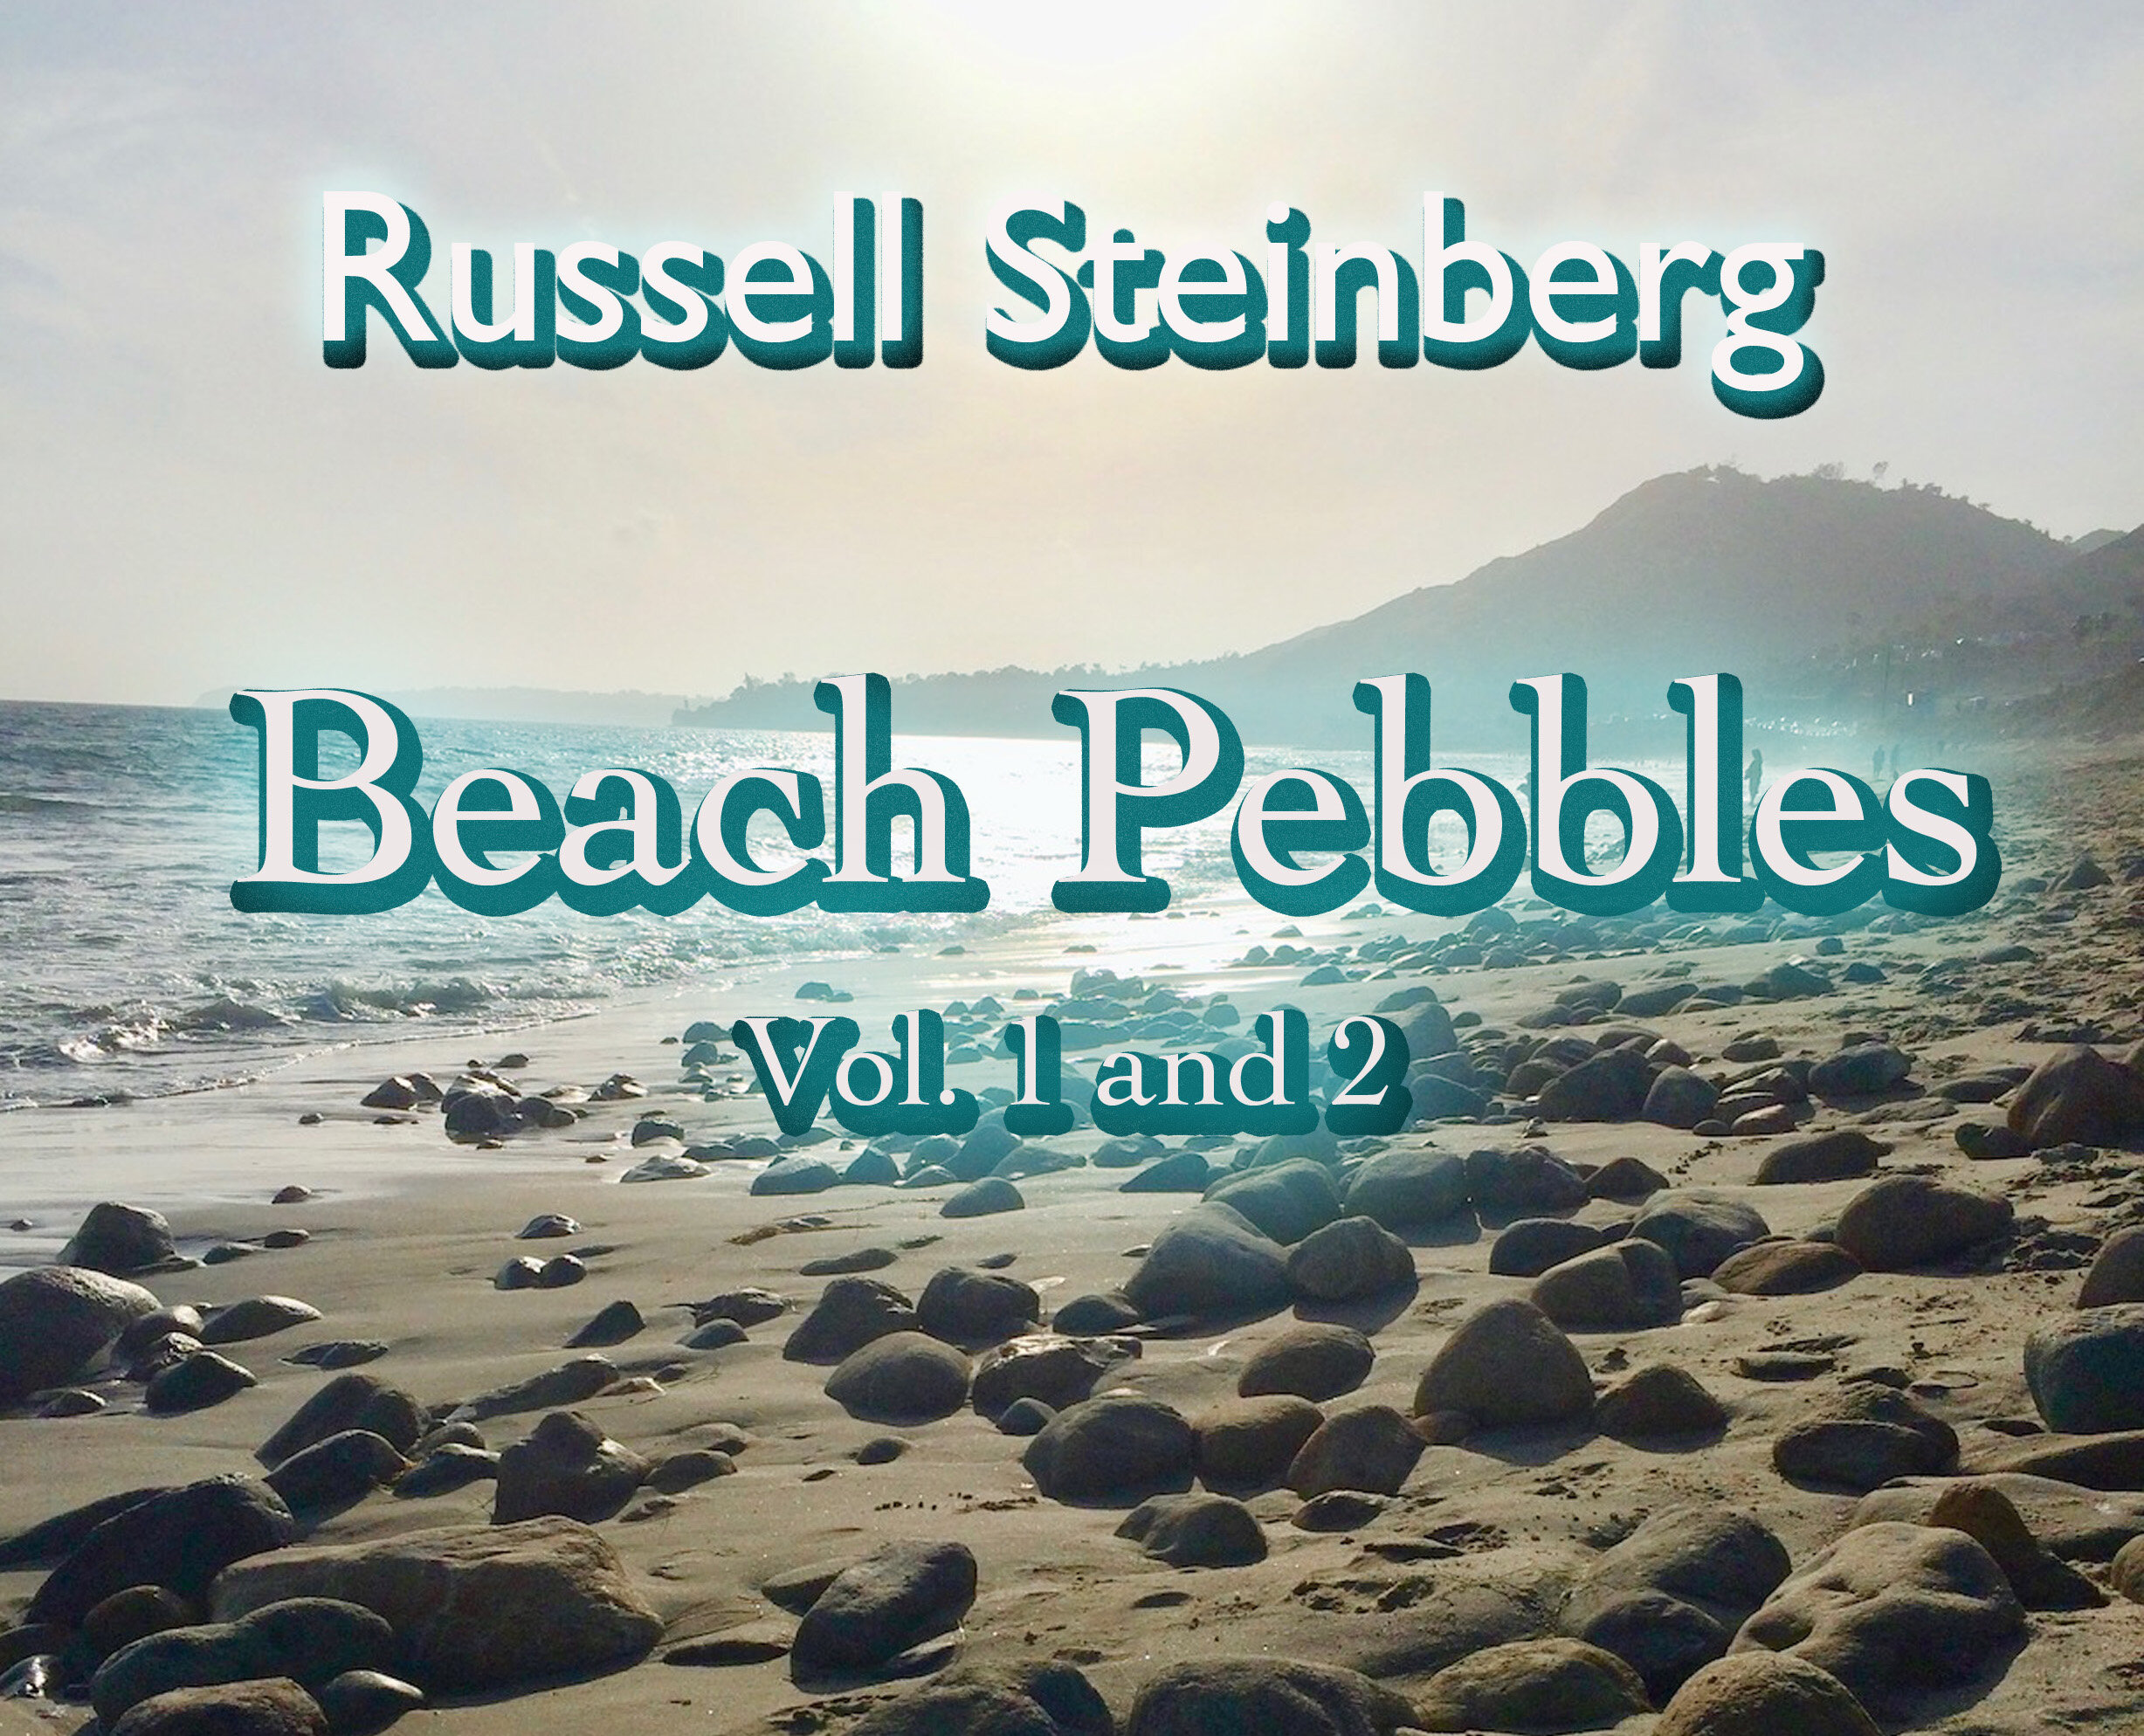 Beach Pebbles Volumes 1 and 2